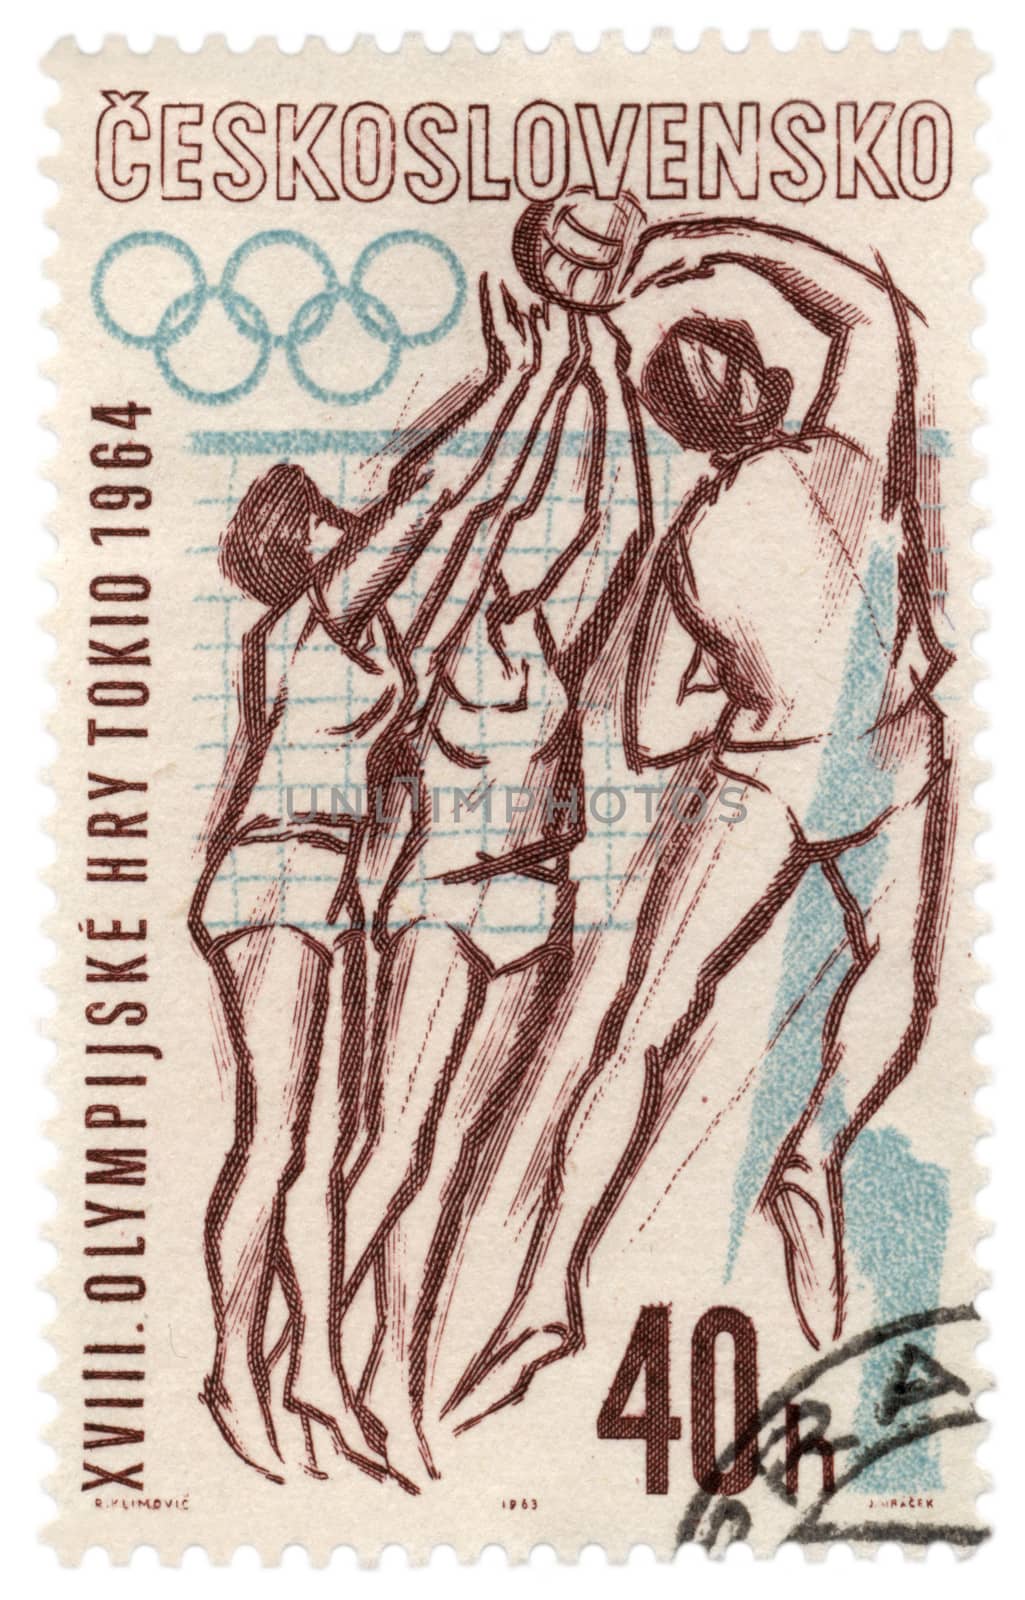 CZECHOSLOVAKIA - CIRCA 1963: A stamp printed in Czechoslovakia, shows women playing volleyball, devoted to Olympics in Tokyo, series, circa 1963